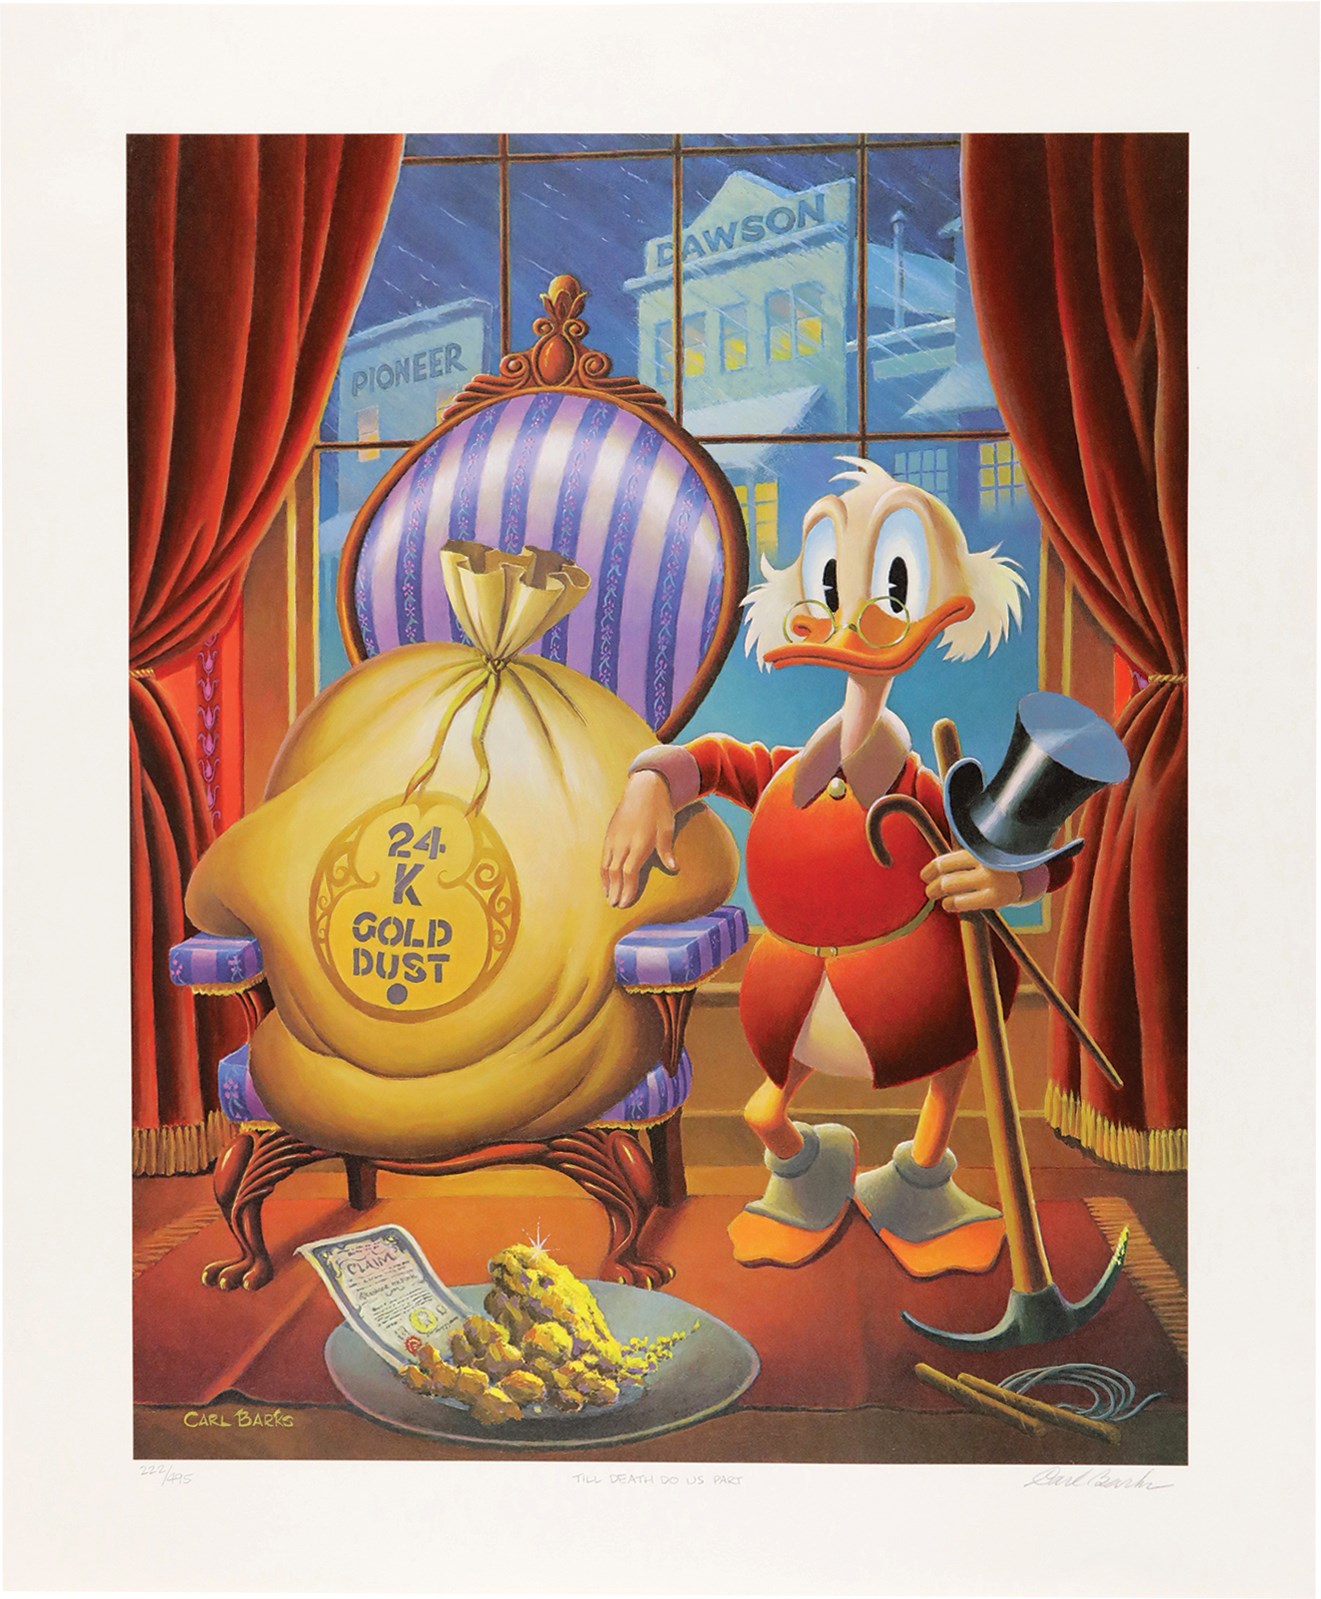 Rock And Pop Culture - Signed 1984 Carl Barks "Till Death Do Us Part" Limited Edition Lithograph (222/495)